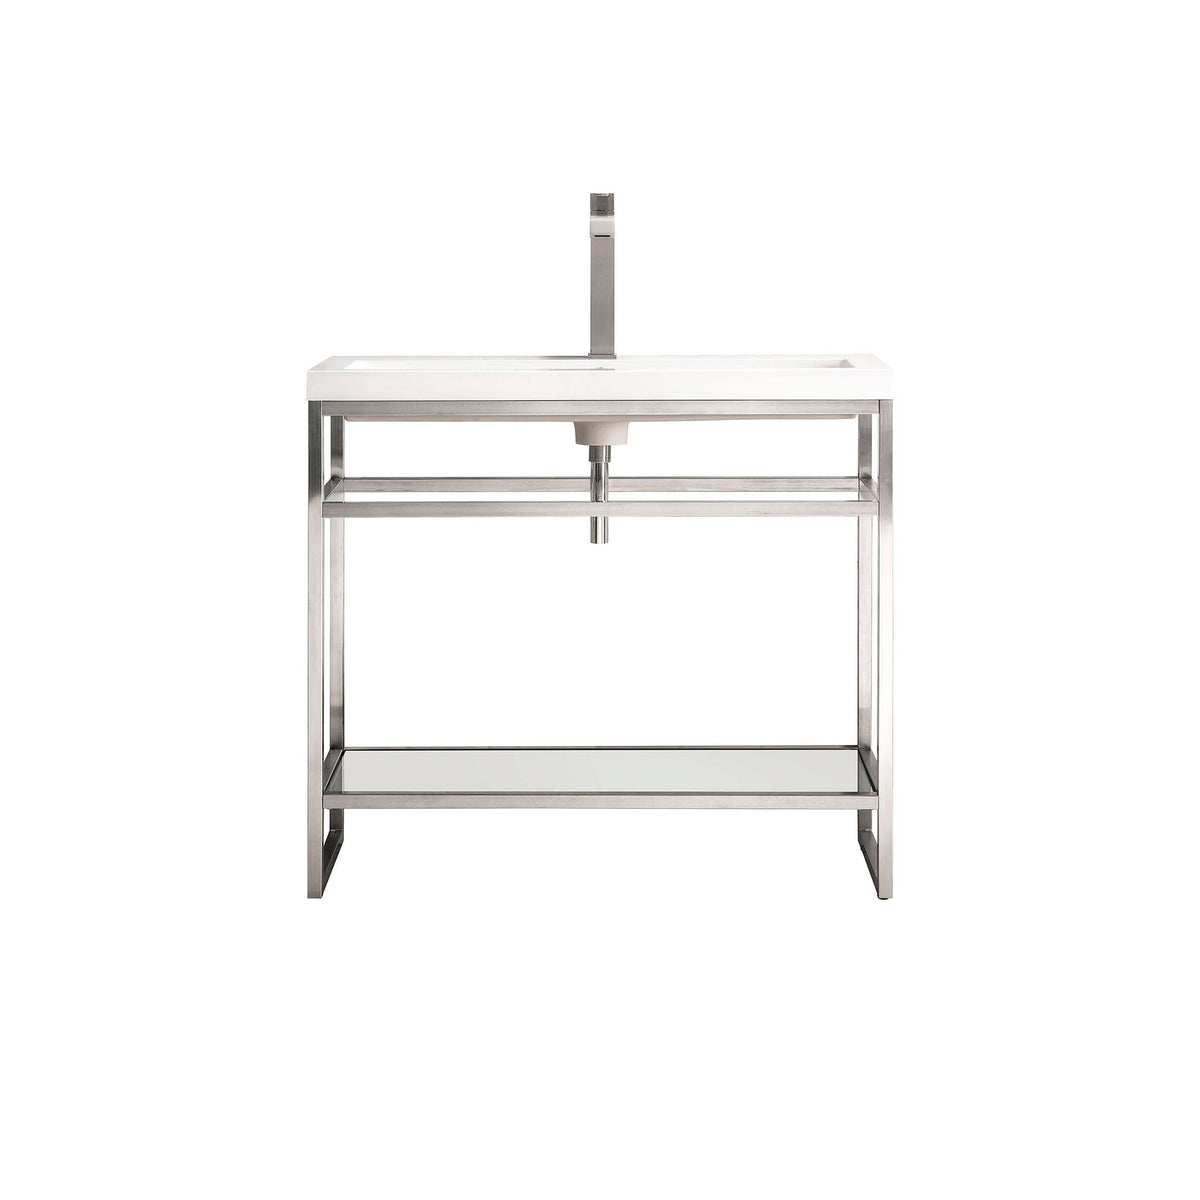 39.5" Boston Single Sink Console, Brushed Nickel w/ White Glossy Resin Countertop